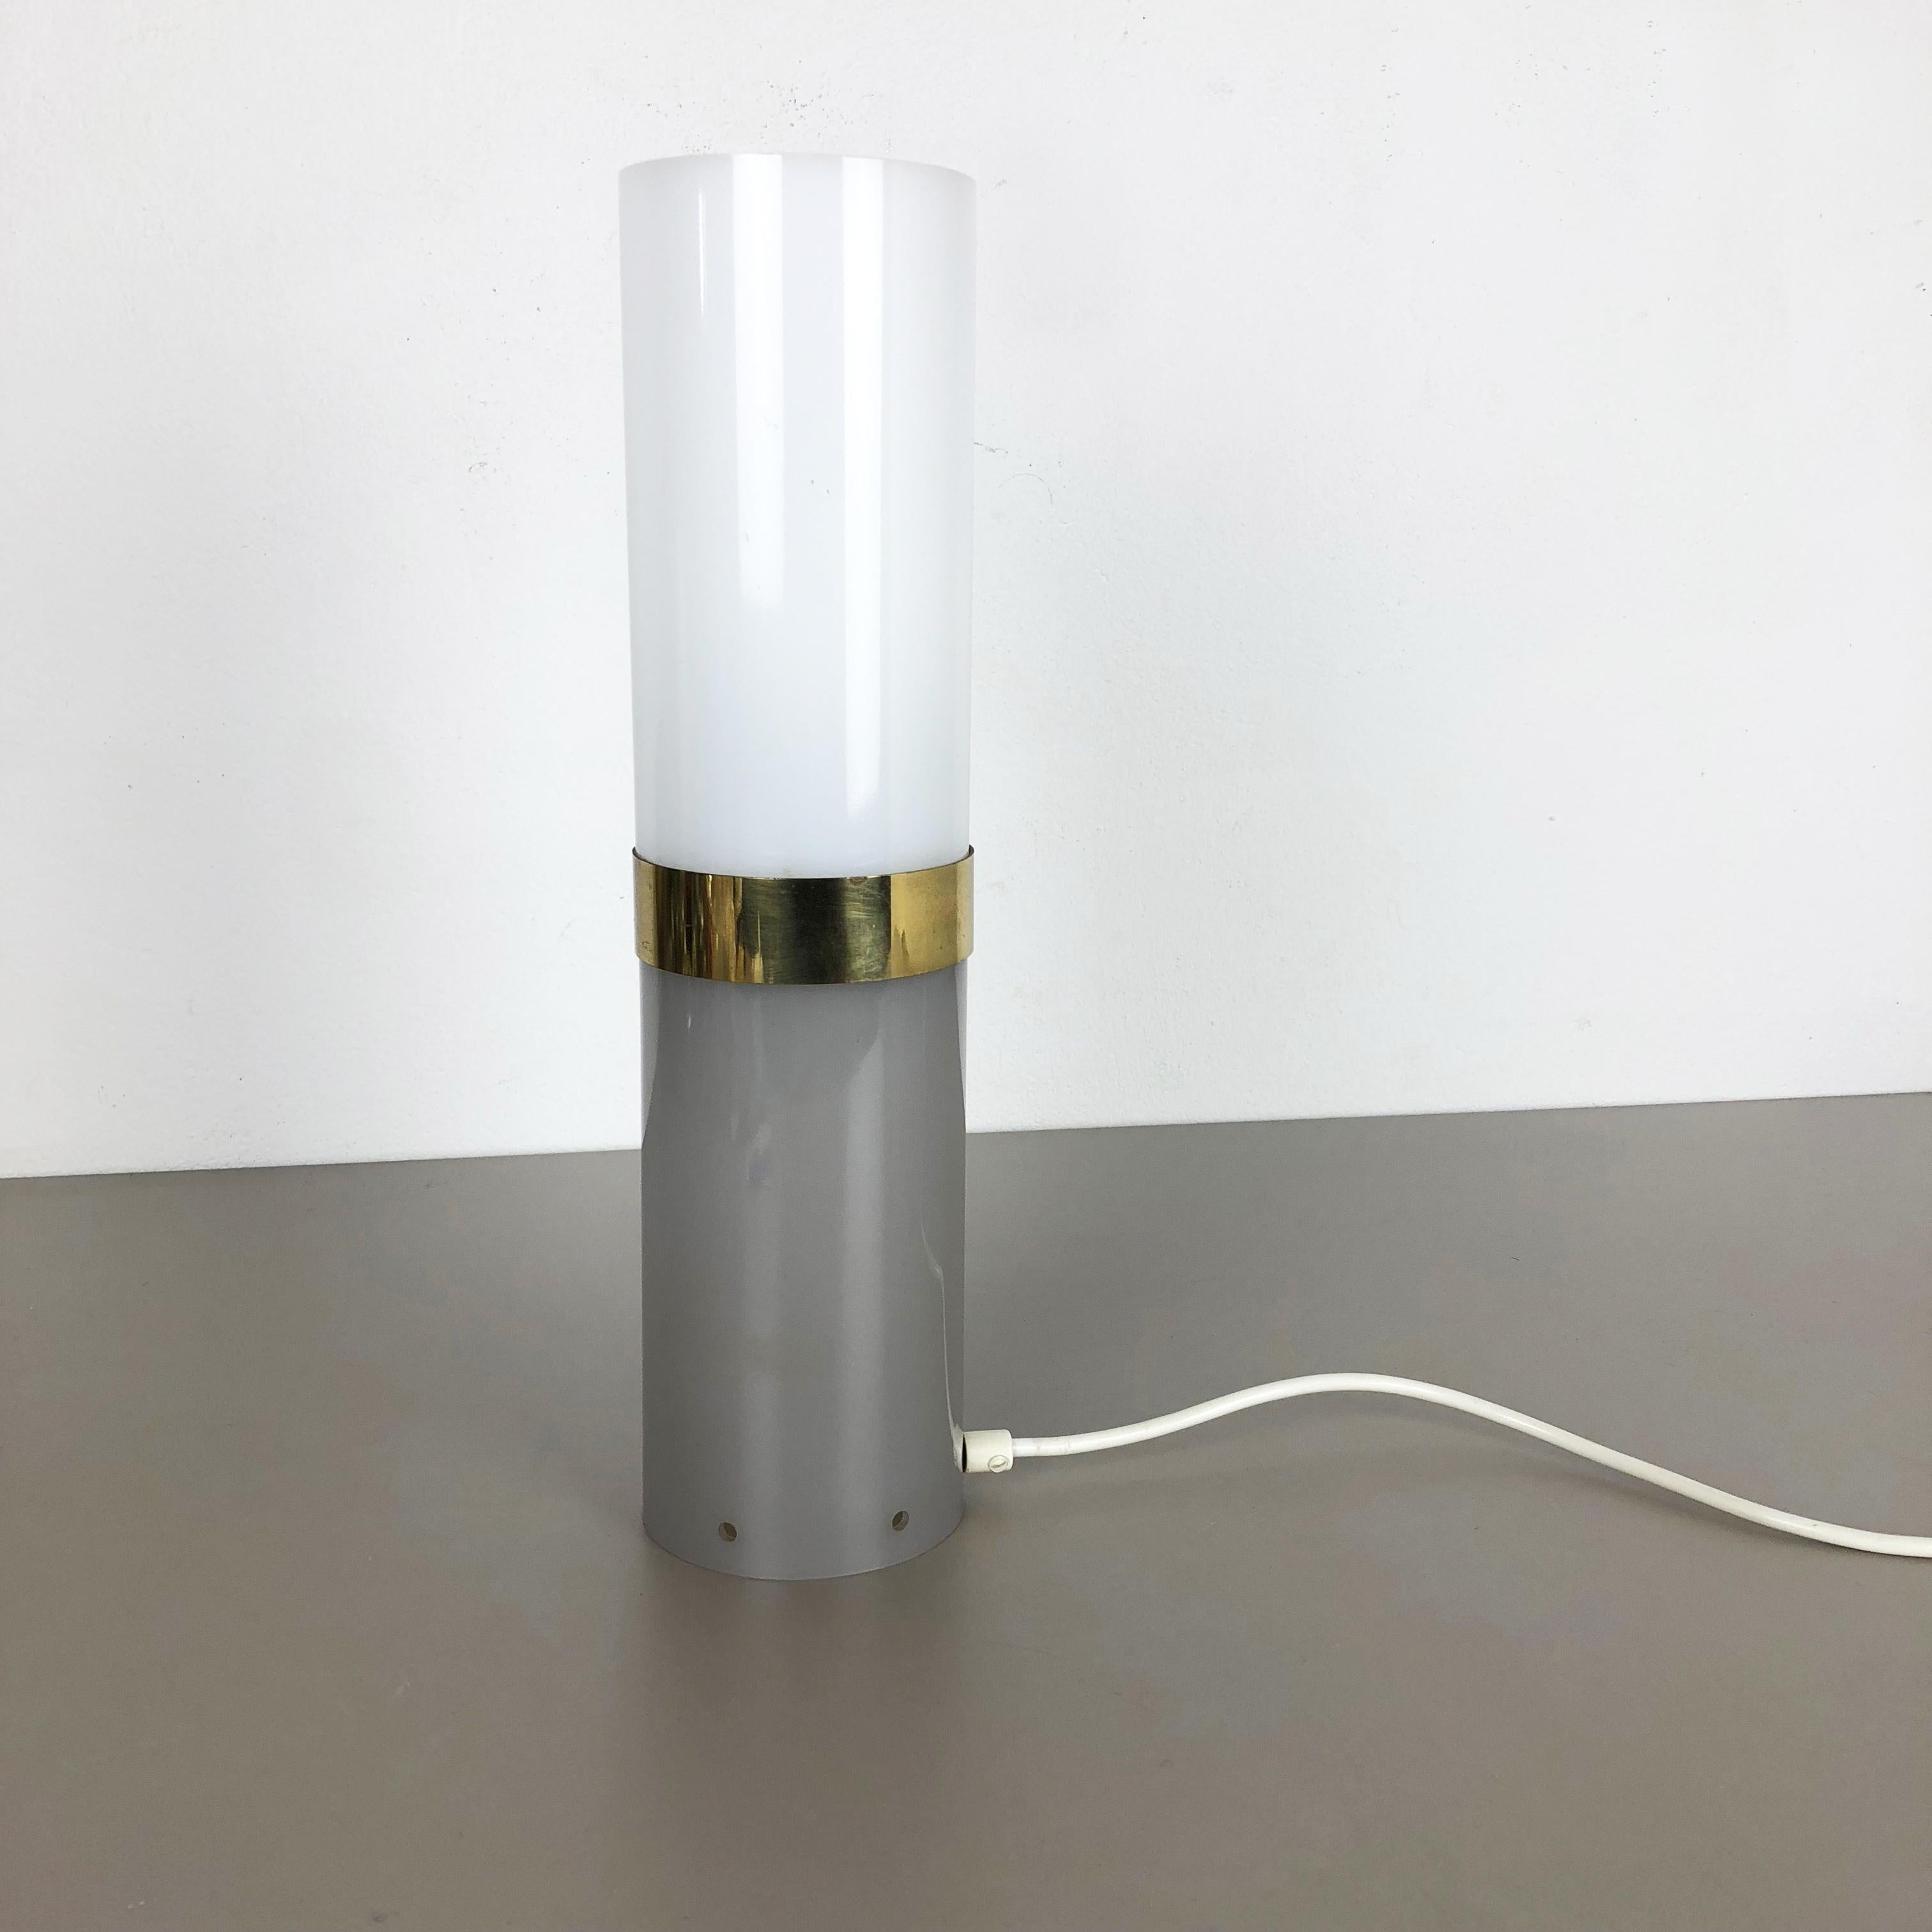 Article:

Table light


Origin:

Italy


Age:

1960s.



   

This fantastic and minimalist table light was designed and produced in the 1960s in Italy. It was made of acryl and features two different colored elements connected